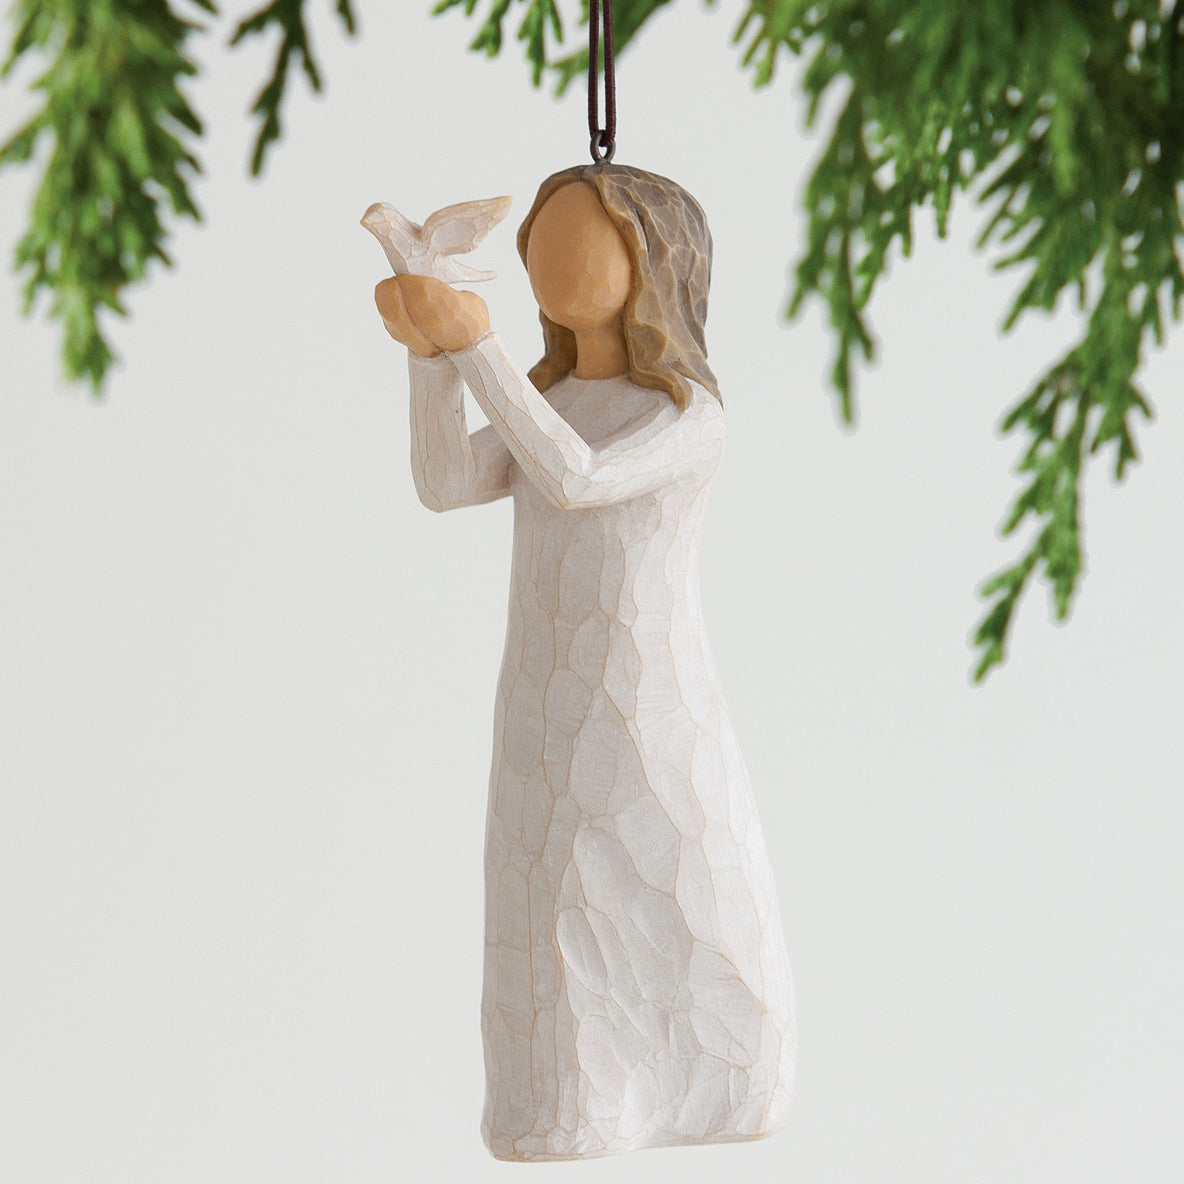 Willow Tree - Hanging Ornament - Soar